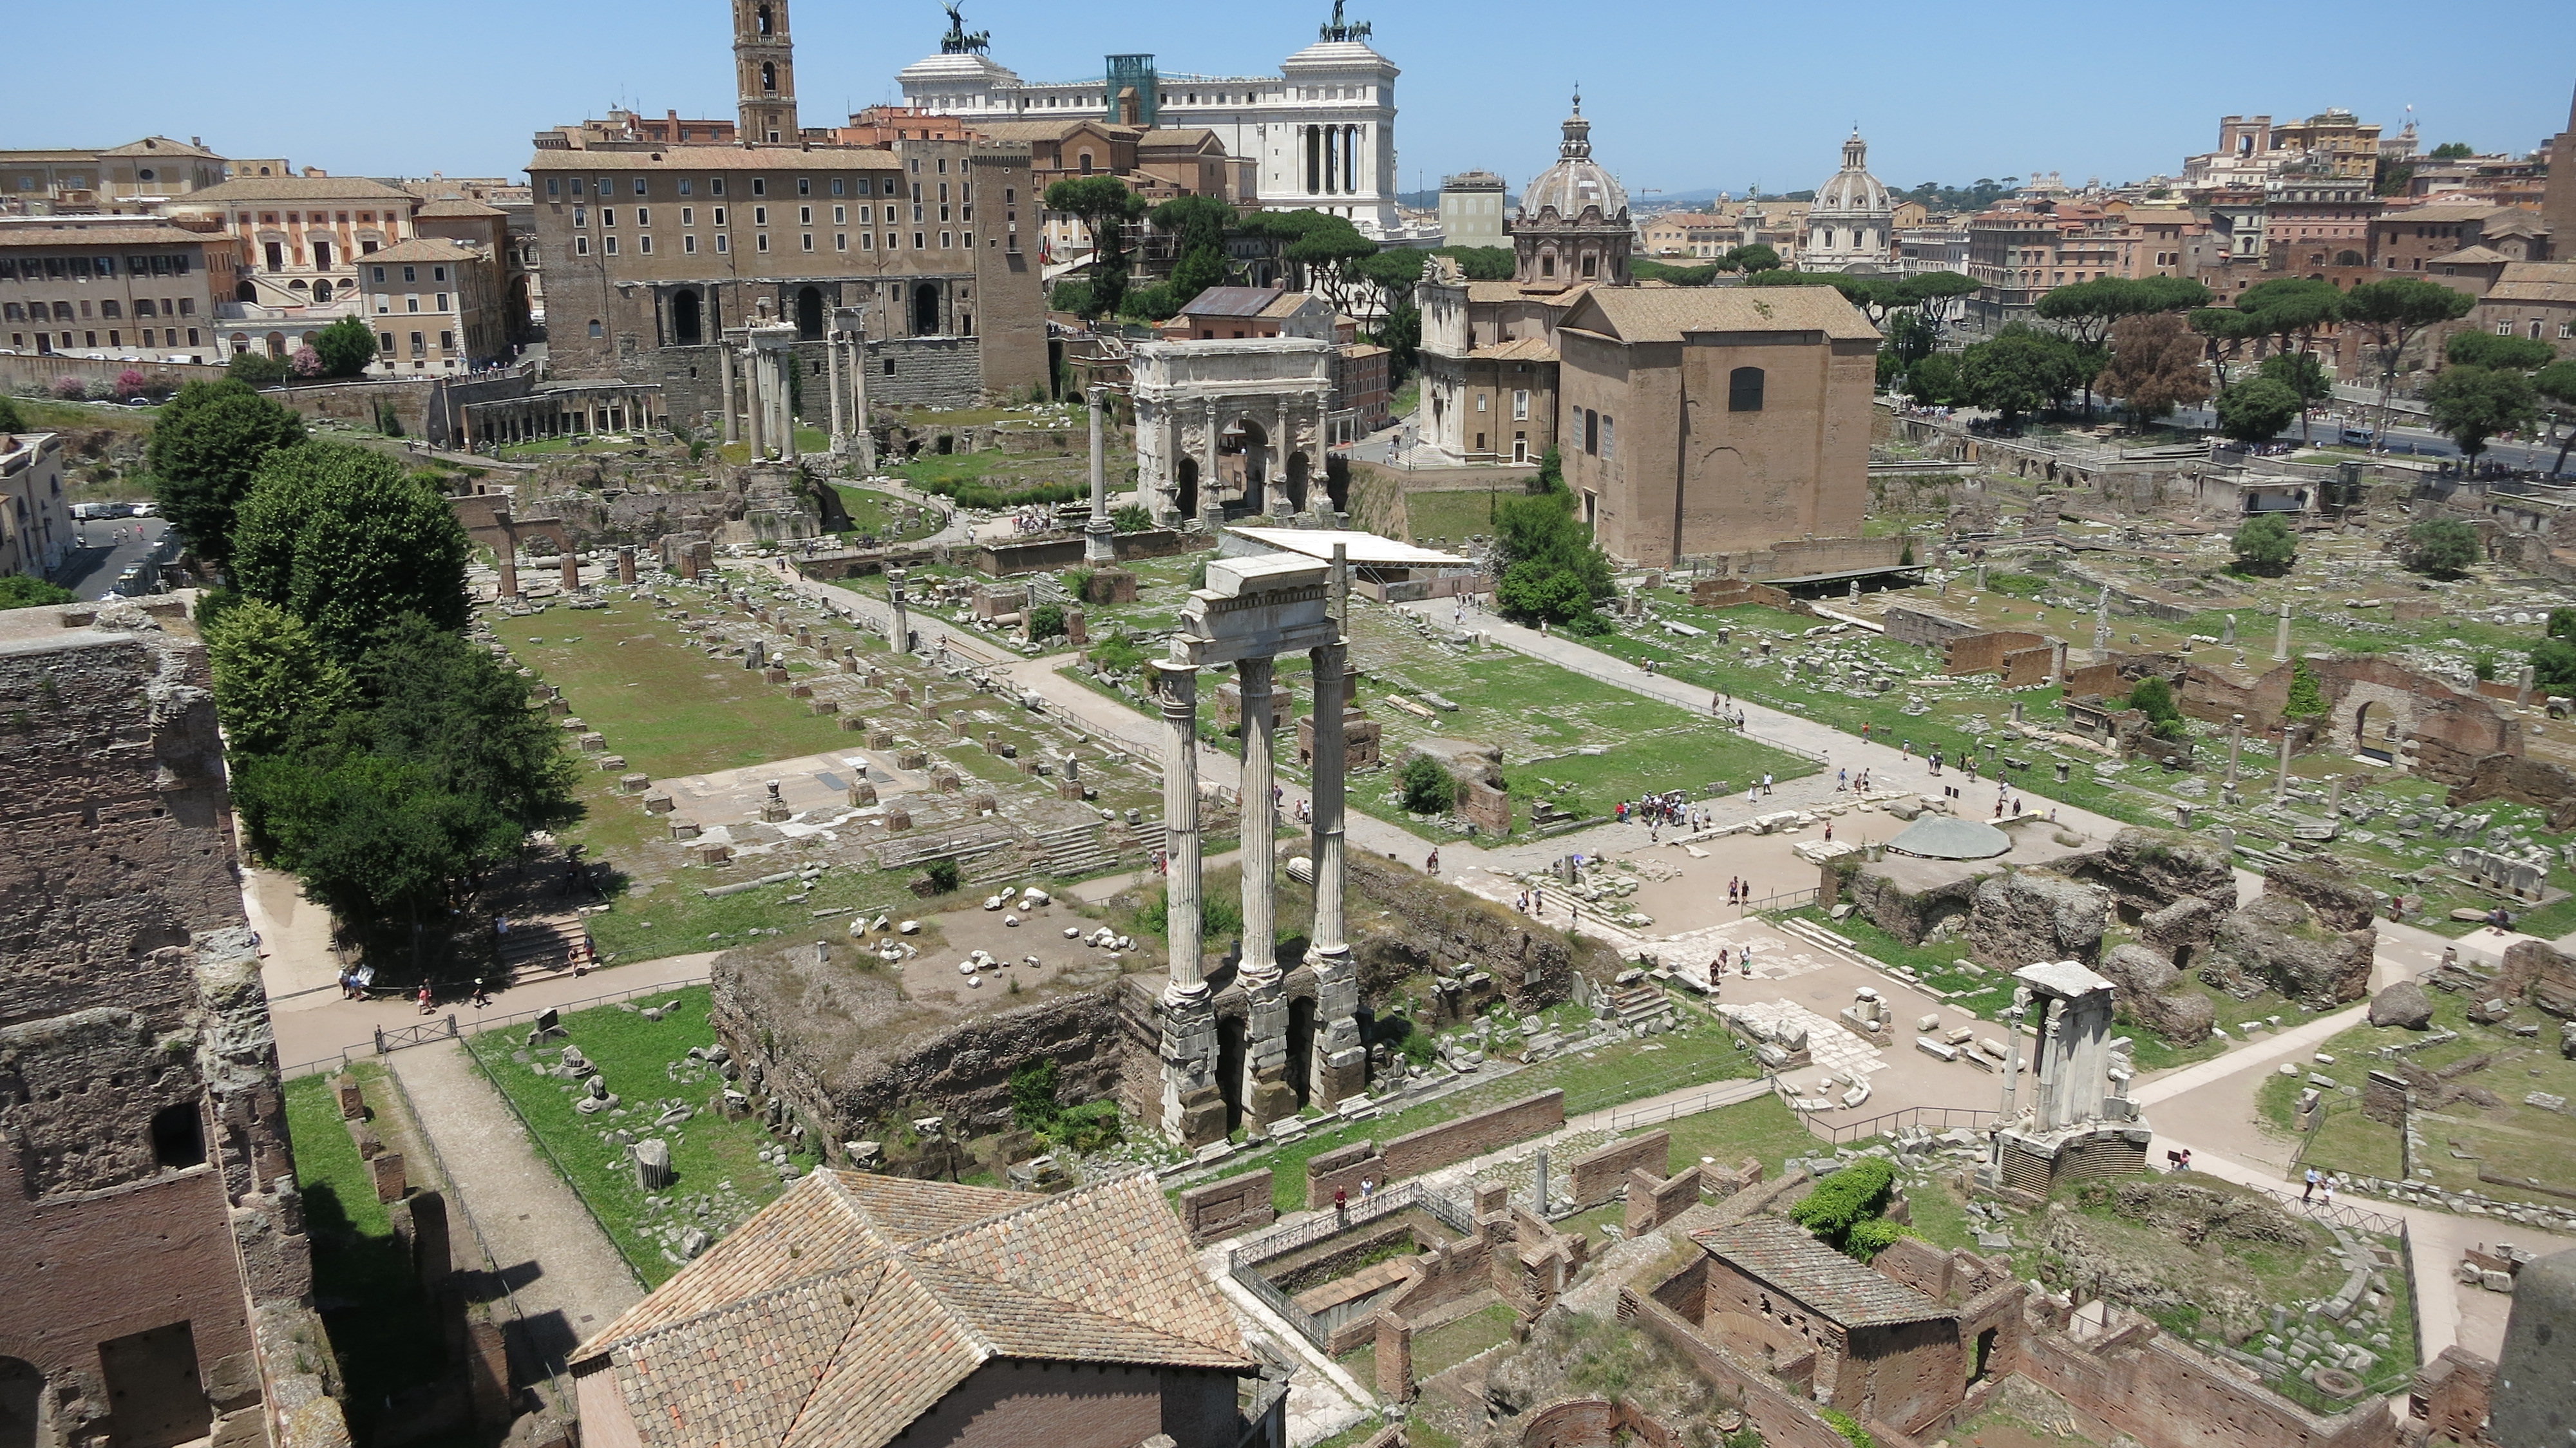 
                       Figure 3: Another view of the forum from the Palatine
                  